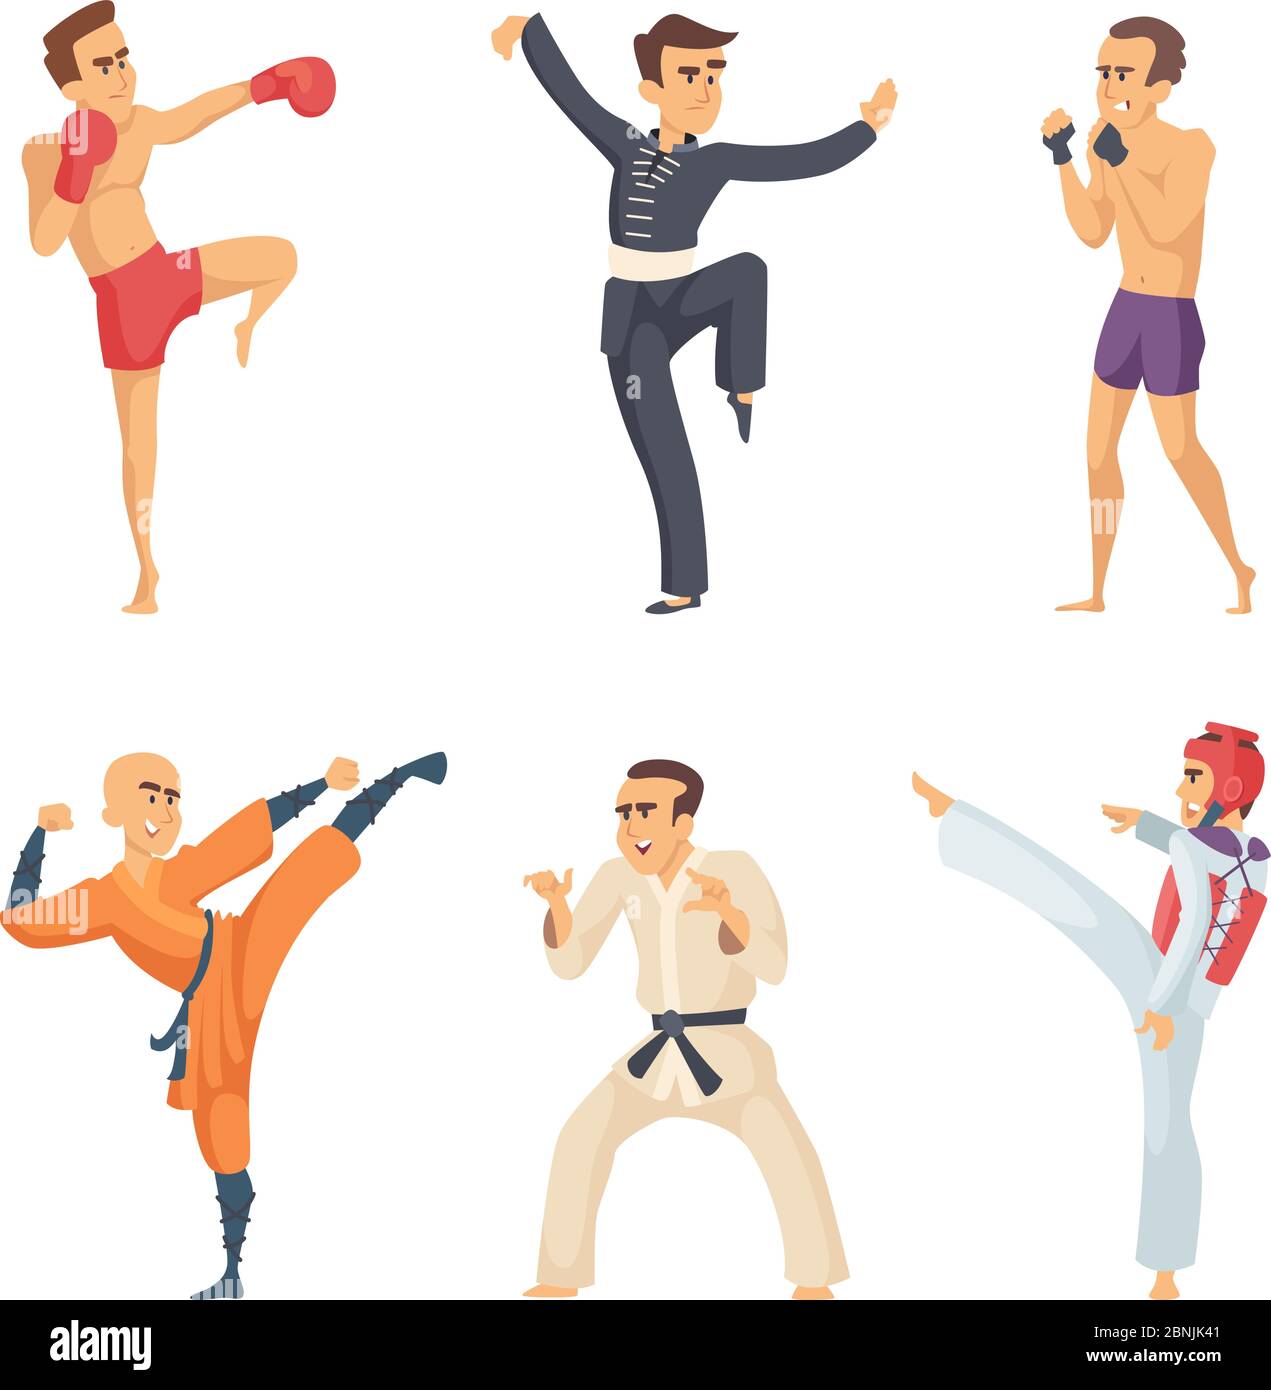 Free: Martial arts pose - nohat.cc